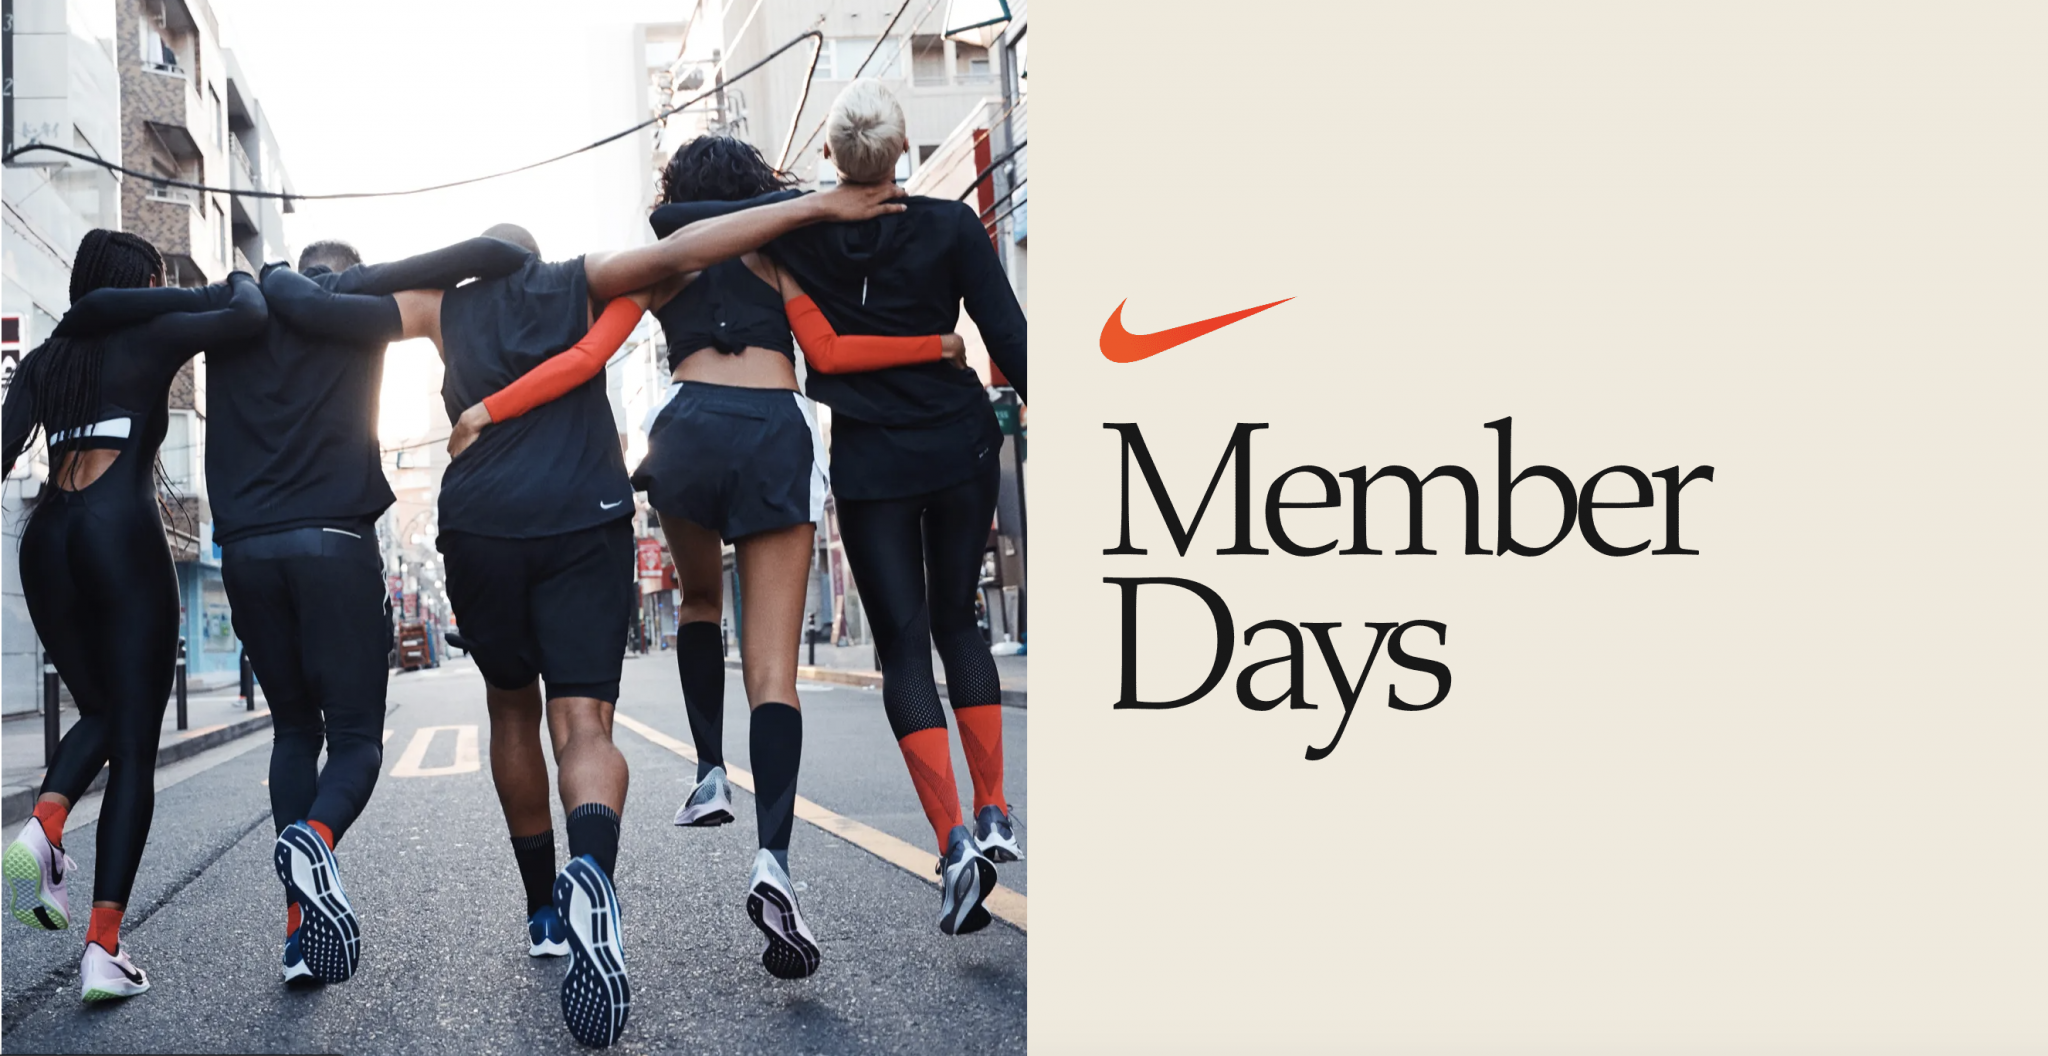 Nike members can save up to 50% on 